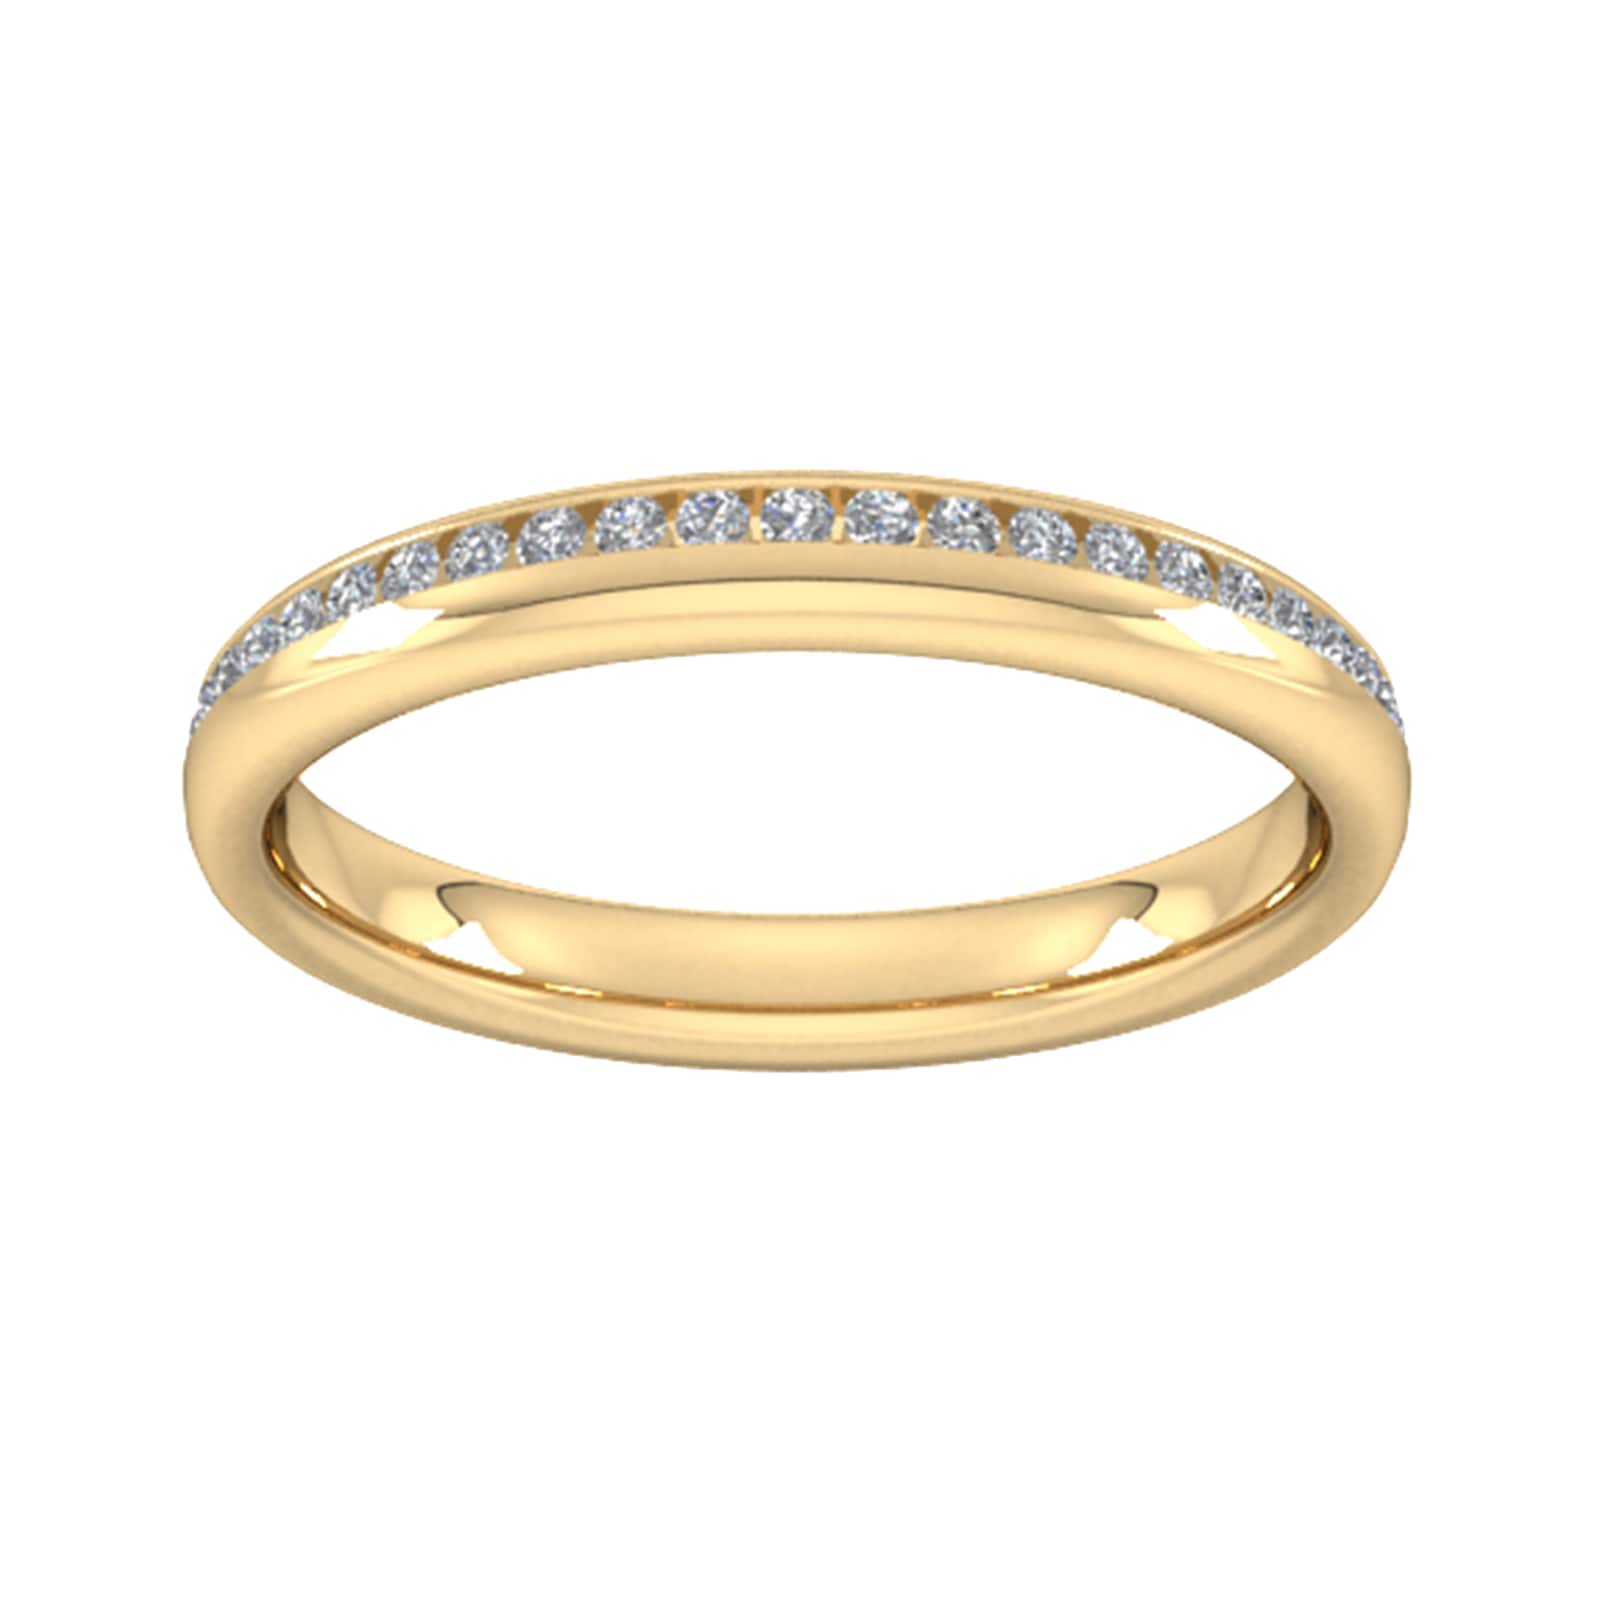 0.18 Carat Total Weight Brilliant Cut Channel Set With Matt Finish Diamond Wedding Ring In 9 Carat Yellow Gold - Ring Size X